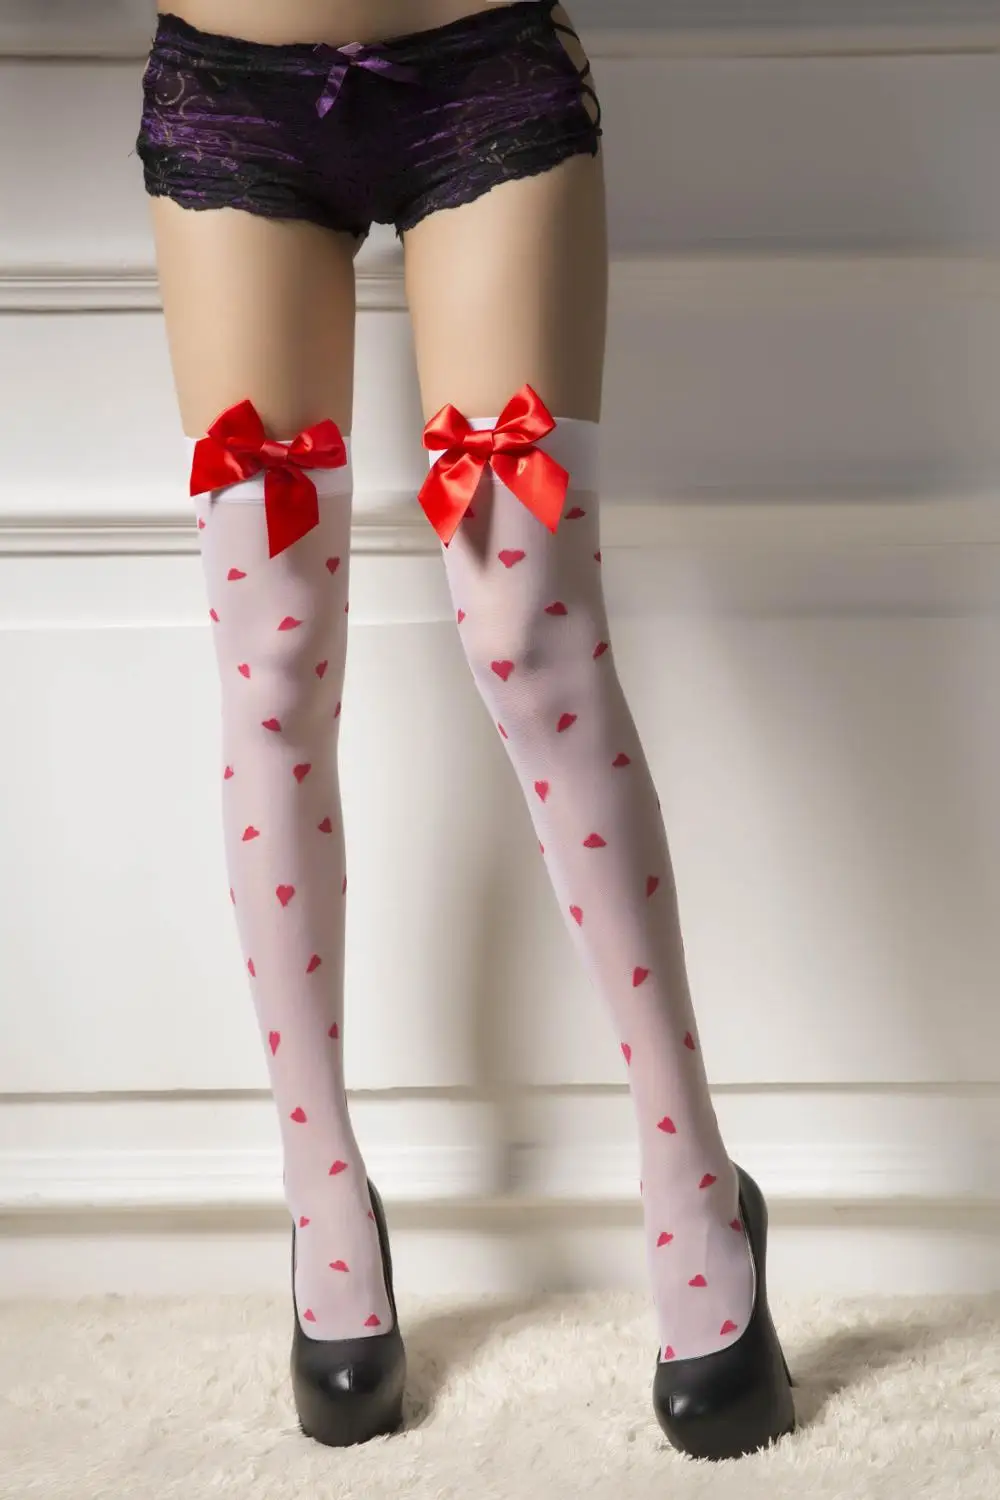 Cute Red Bow Sexy Stockings Jacquard Stockings For Hot Girl Woman Sex Clothing Costume